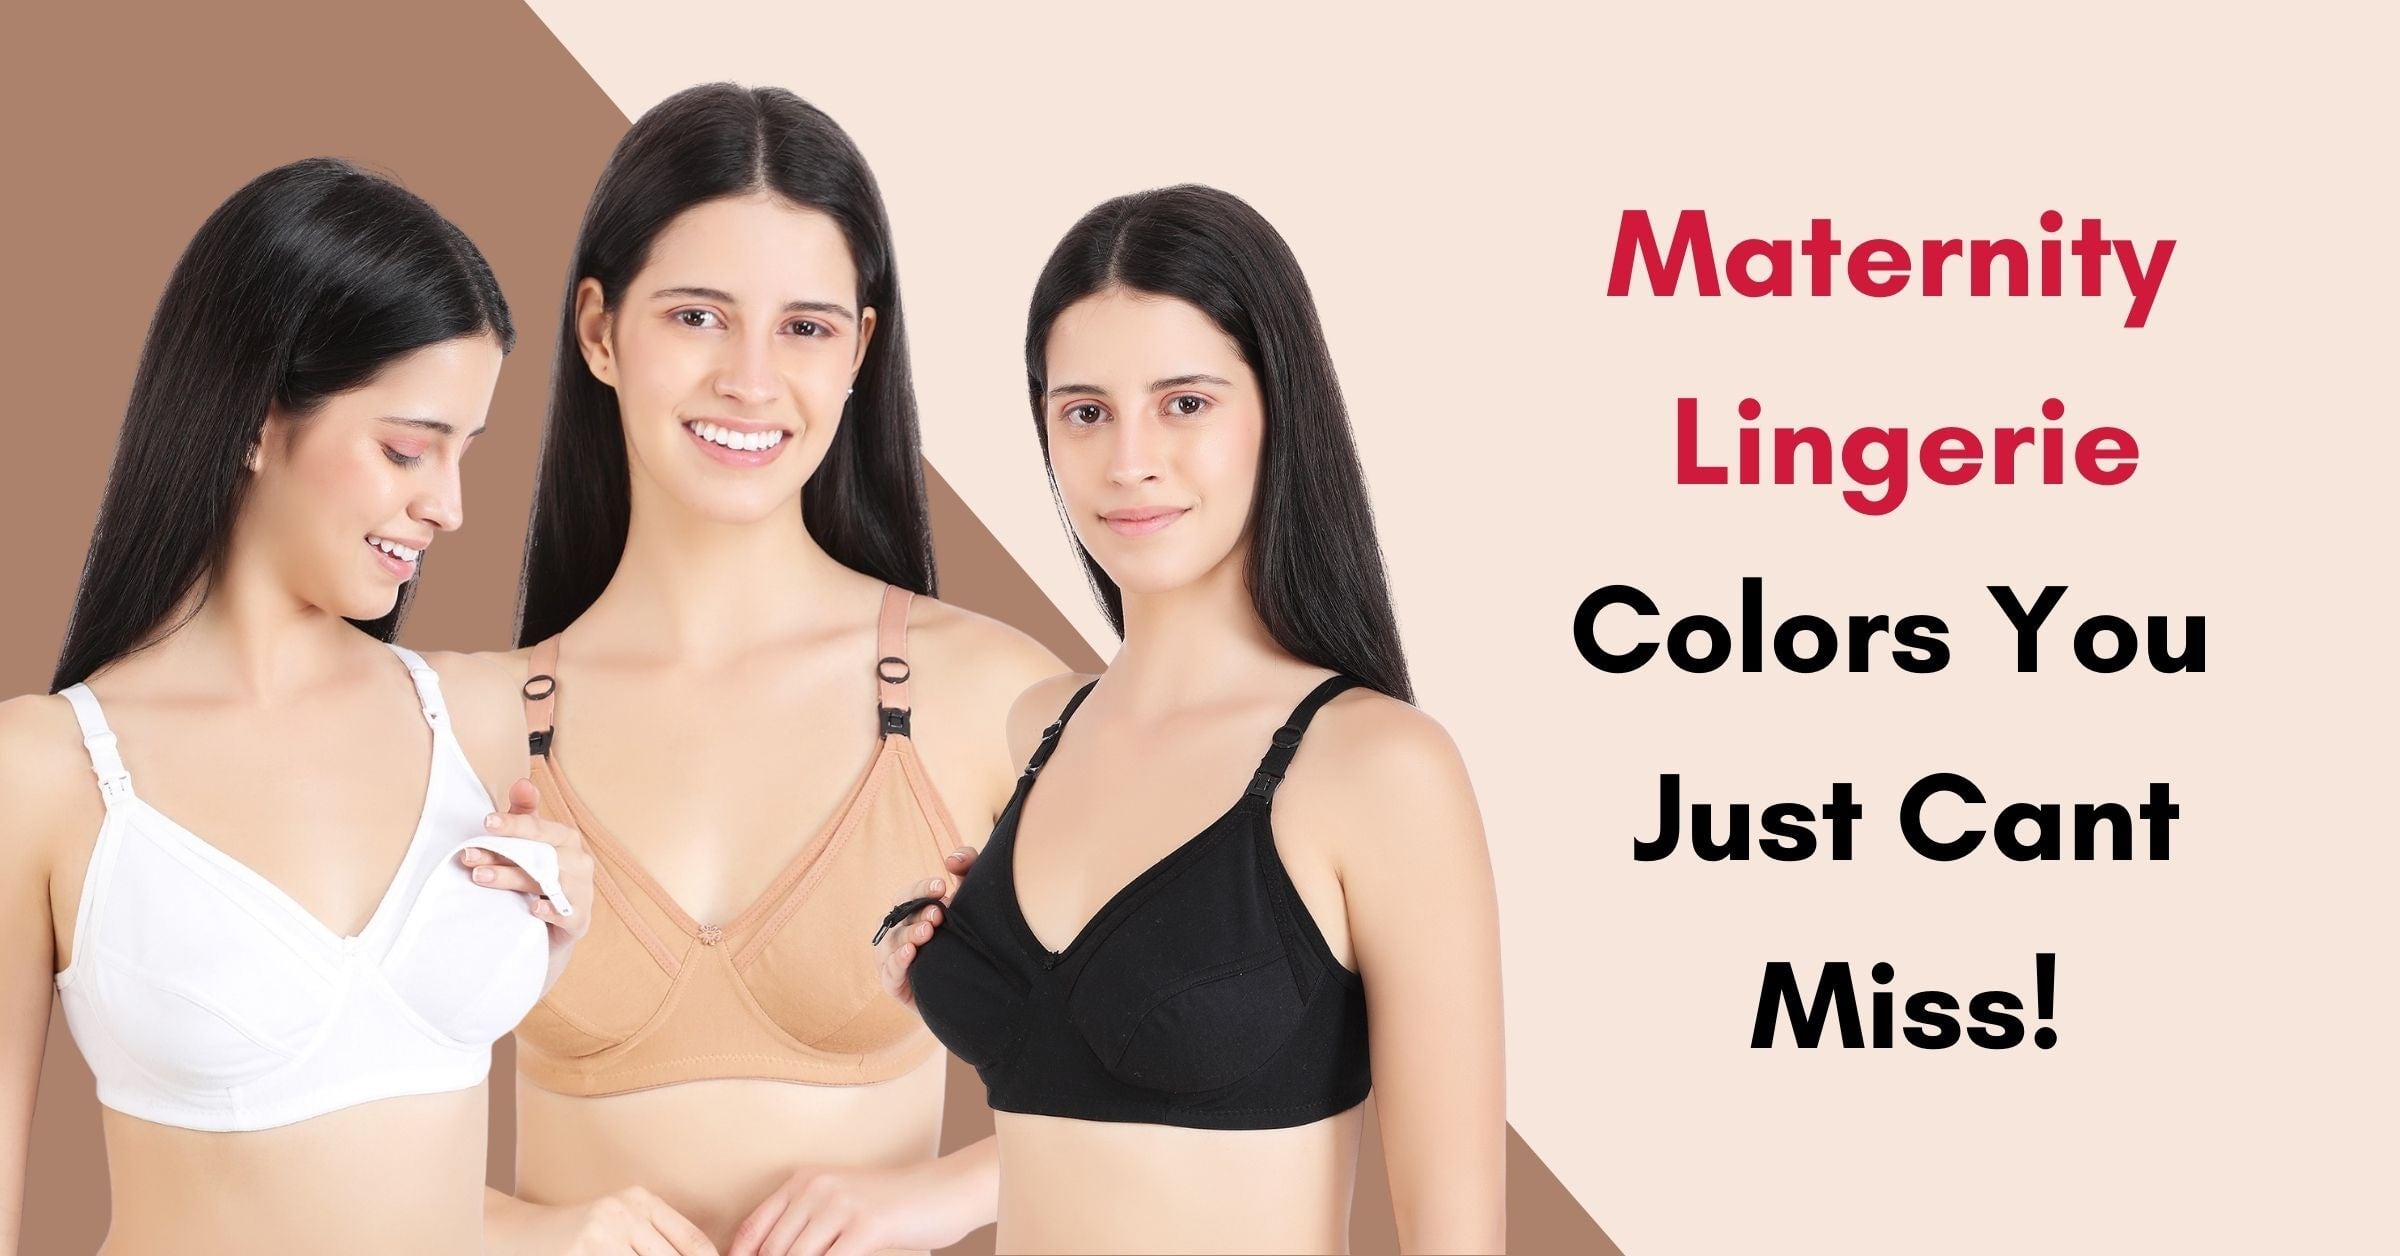 Maternity Lingerie-Colors You Just Cant Miss!